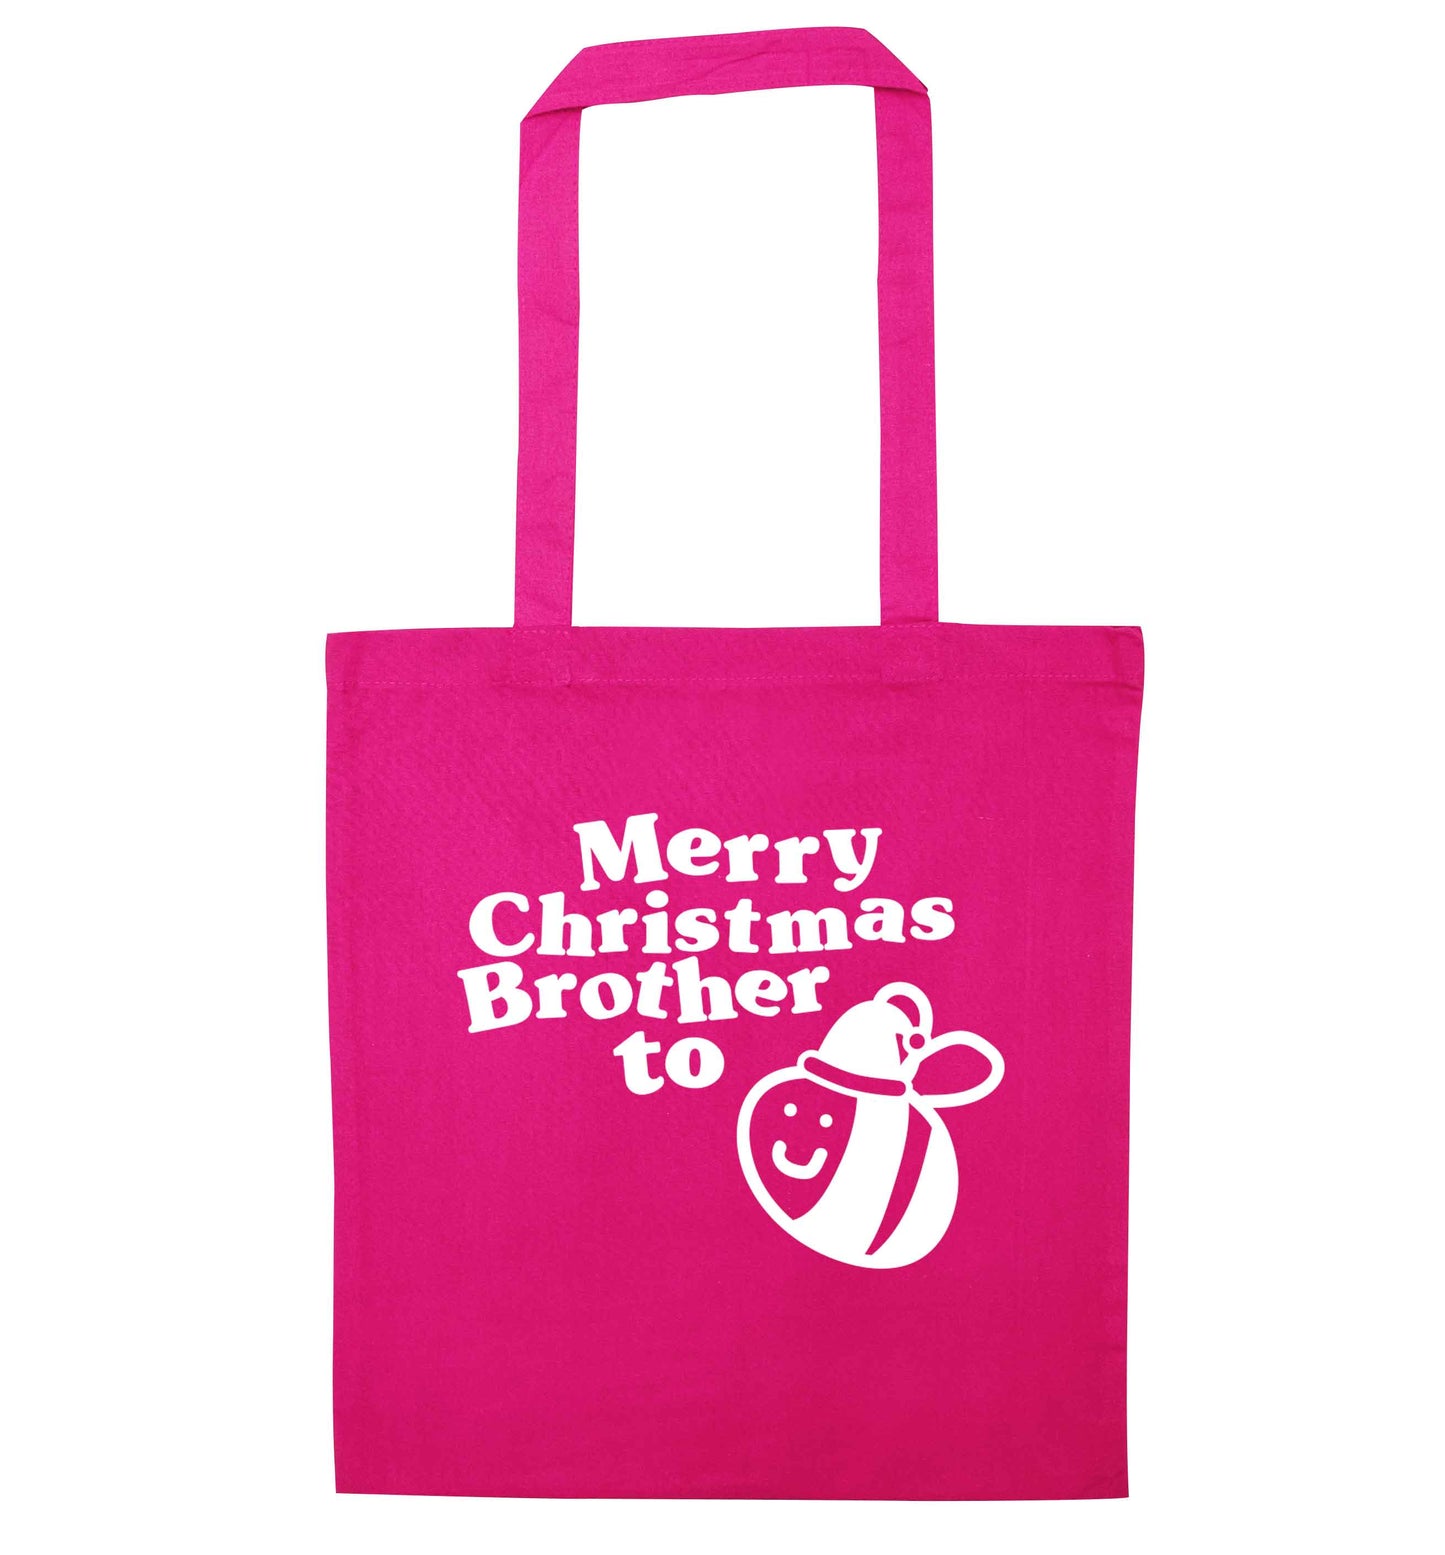 Merry Christmas brother to be pink tote bag